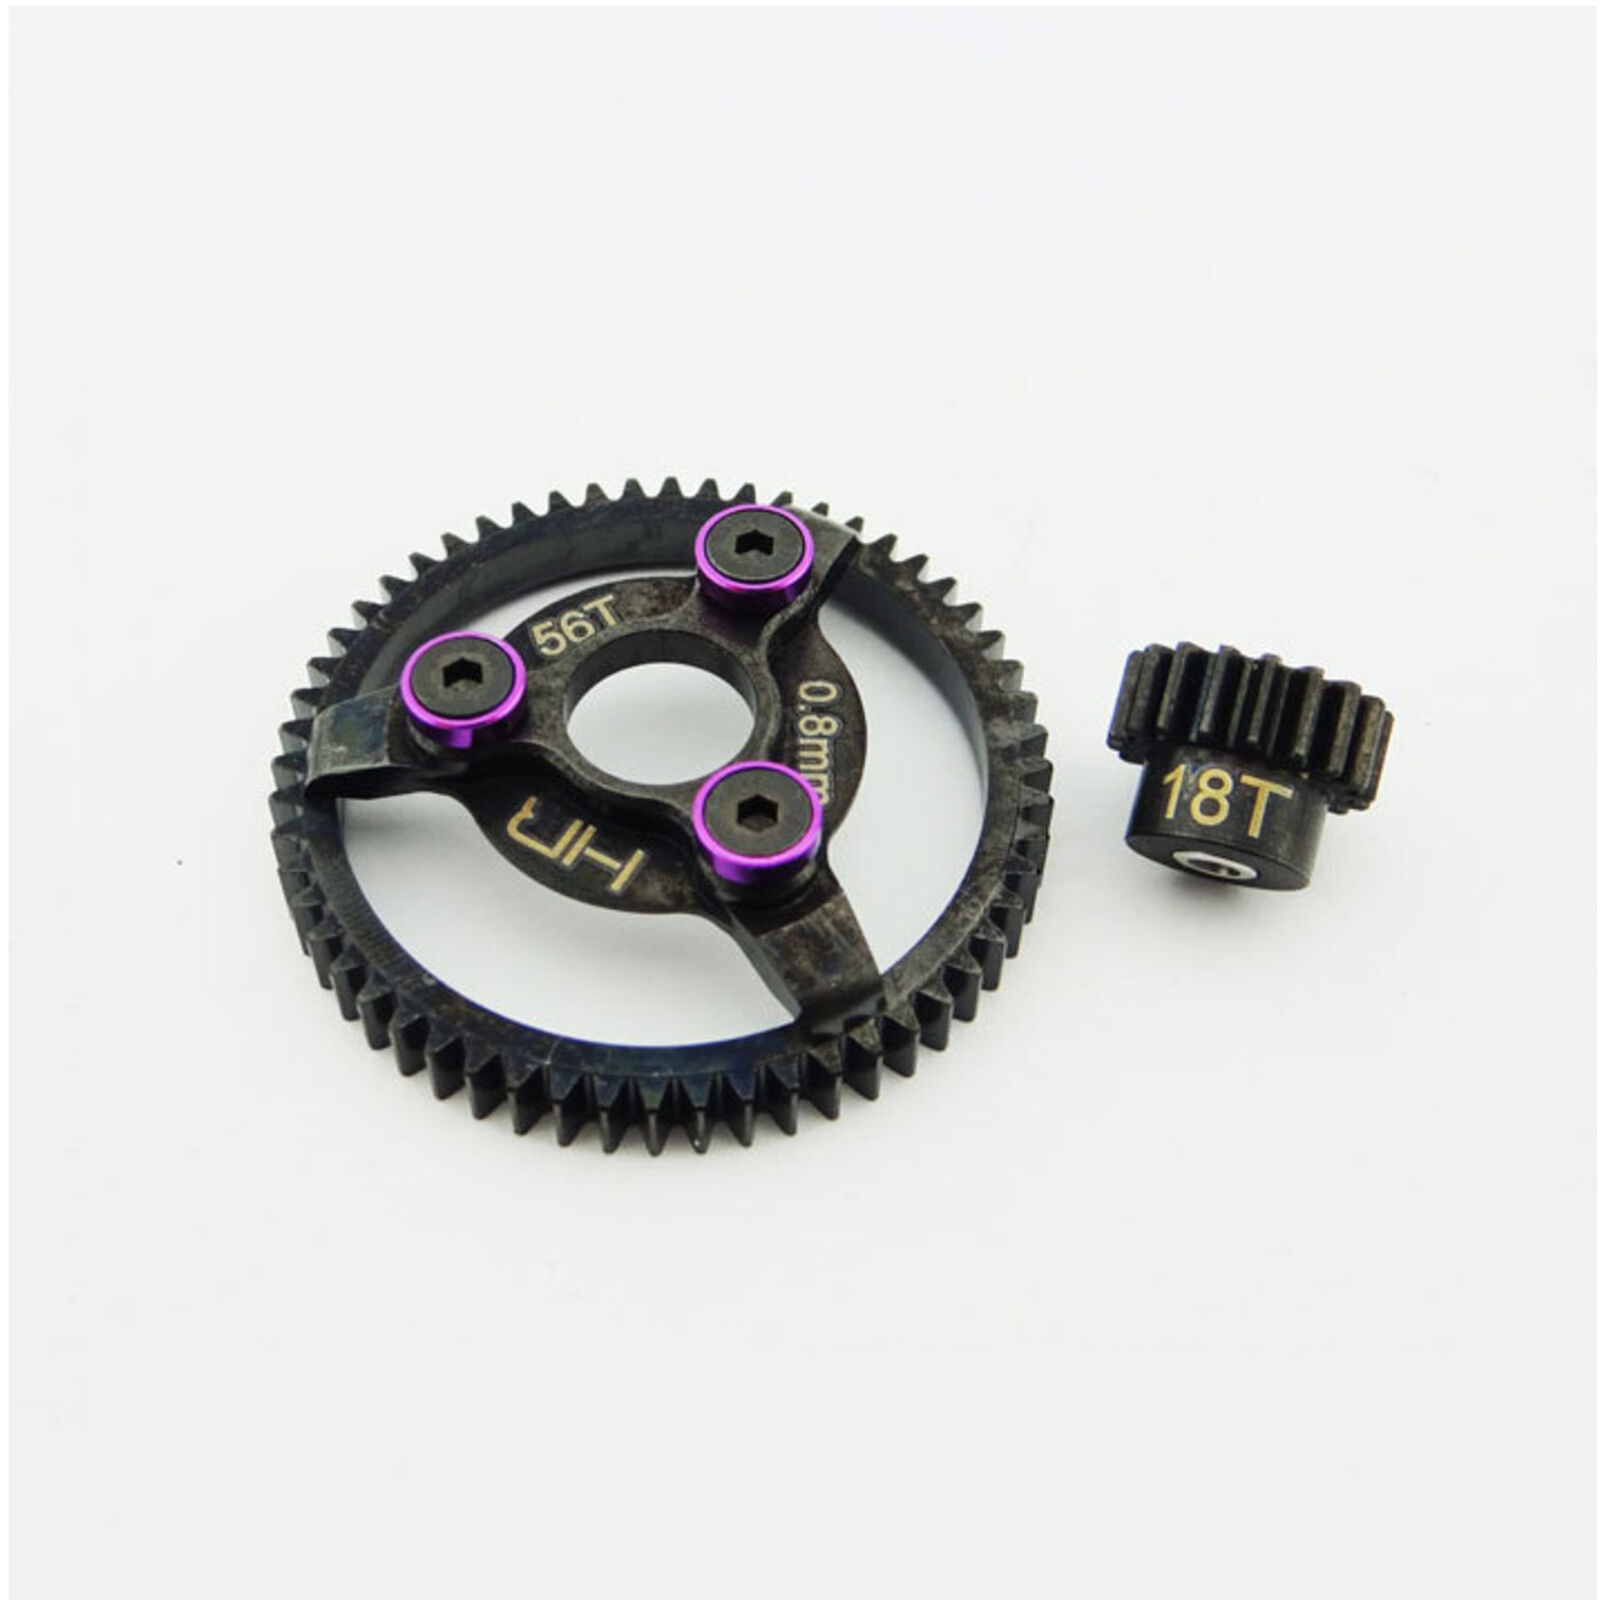 18T Steel Pinion and 56T Spur Gear, 32 Pitch: Traxxas Bandit, Rustler, Slash, Stampede